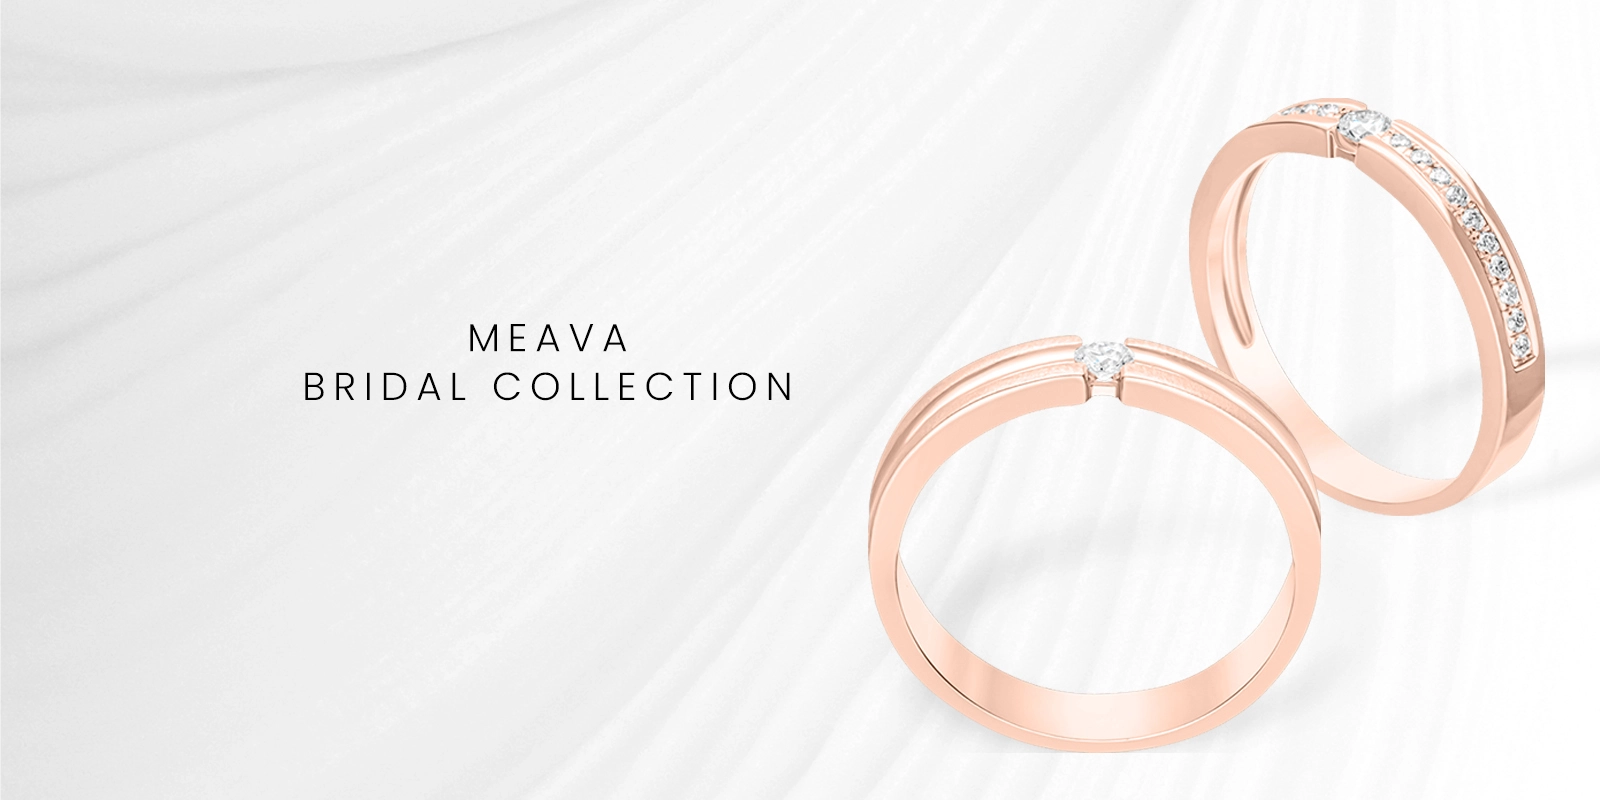 Meava Bridal Set & Collections